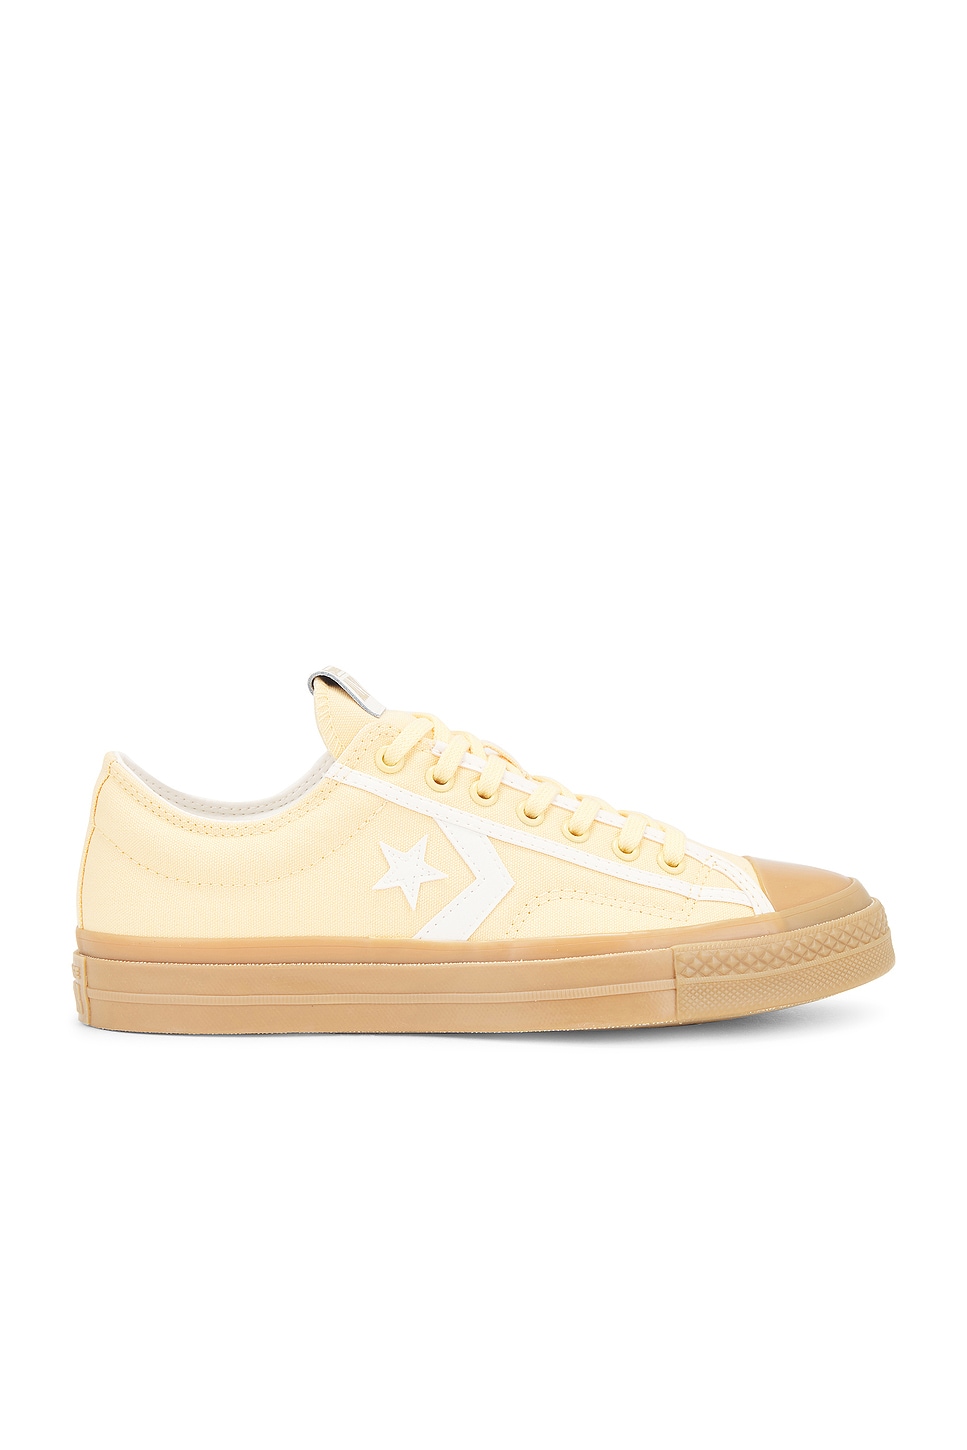 Image 1 of Converse Star Player 76 in Afternoon Sun, Vintage White, & Light Gold